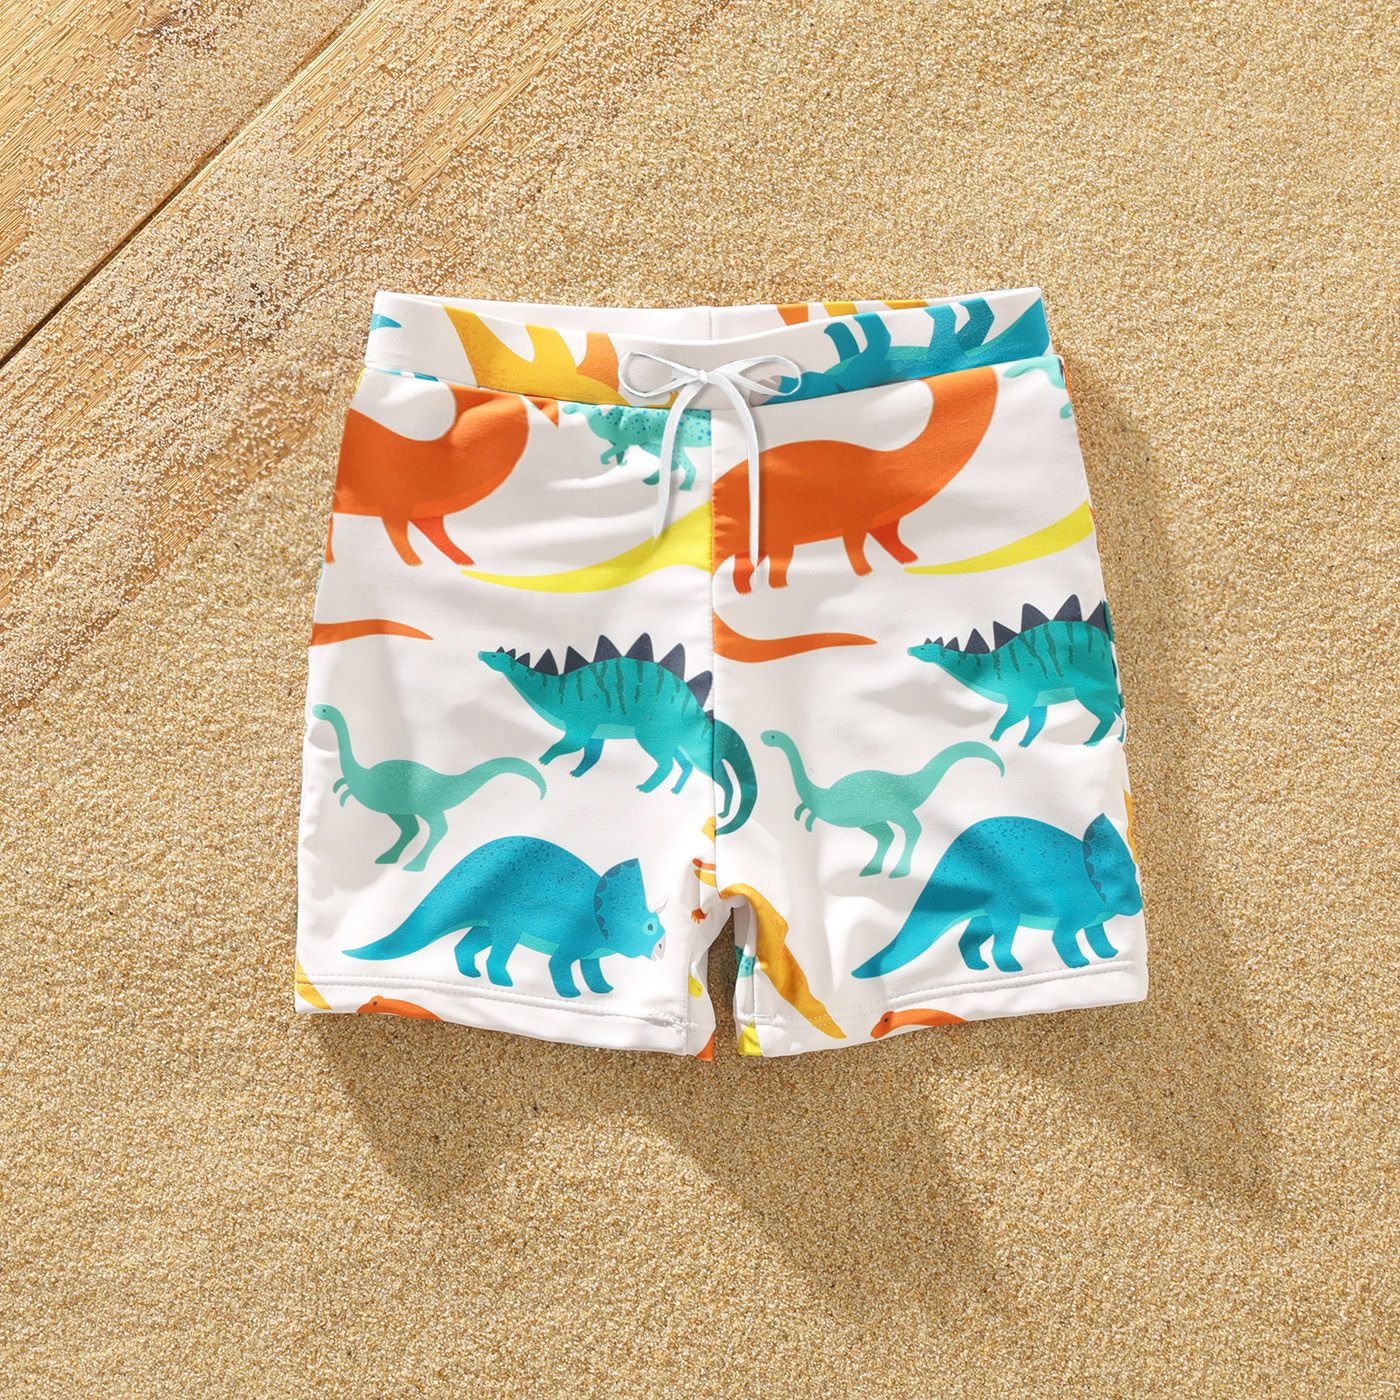 Family Matching All Over Multicolor Dinosaur Print Swim Trunks Shorts and Ruffle Two-Piece Swimsuit